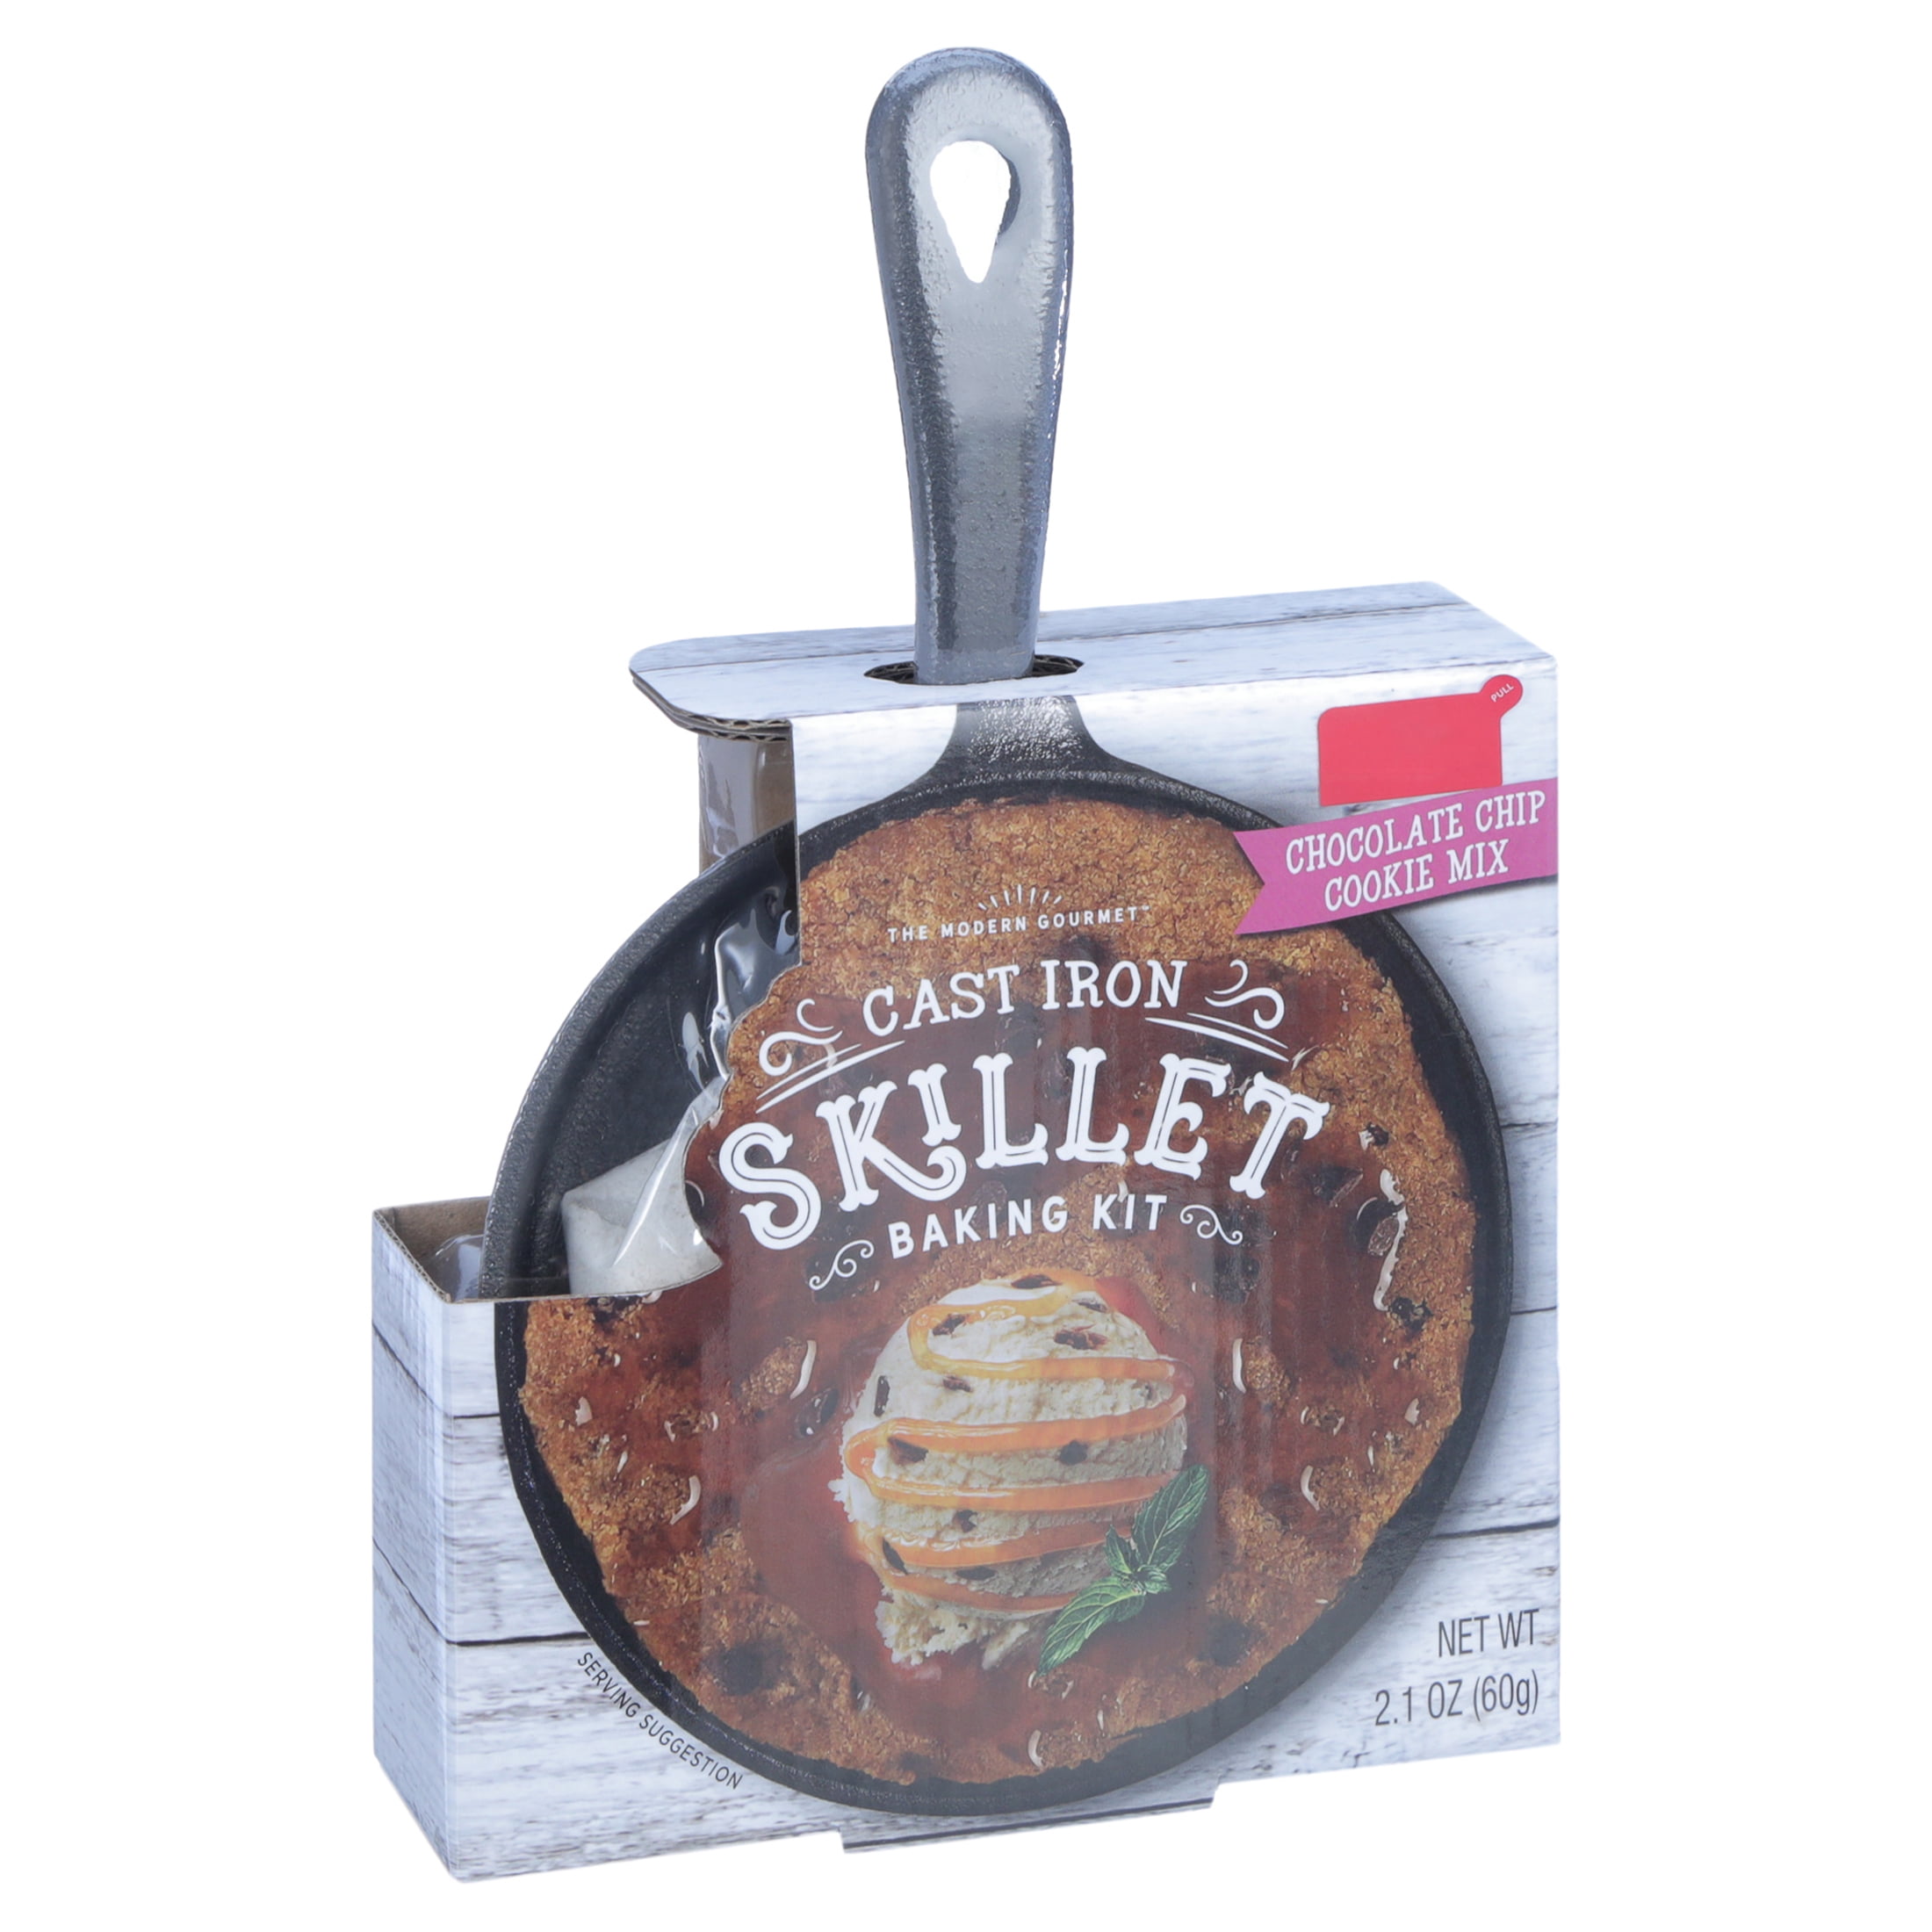  Thoughtfully Gourmet, Large Cookie Skillet Baking Kit, Made  with Nestle Chocolate Chips, Gift Set Includes Sharable Size Chocolate Chip  Cookie Mix and Reusable Large Cast Iron Skillet : Grocery 